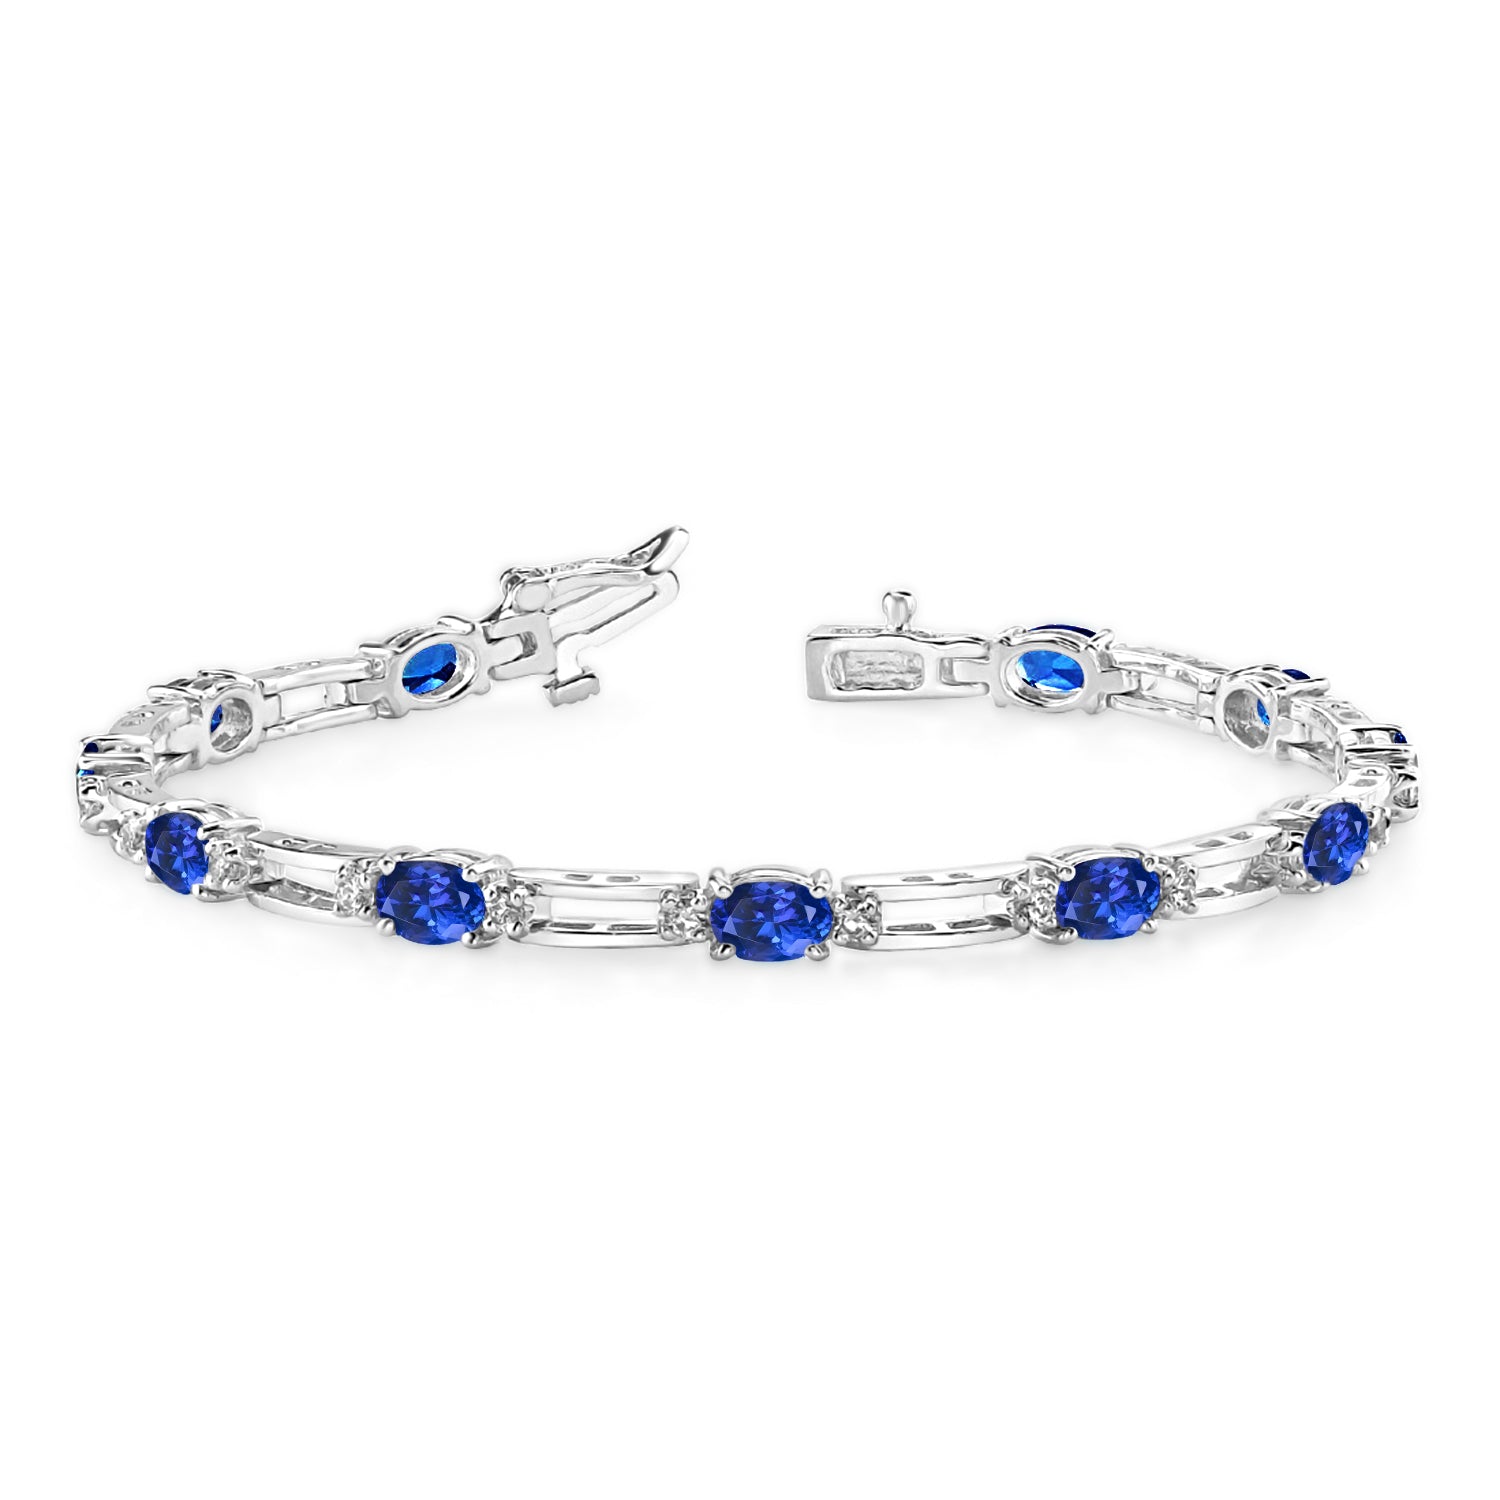 How's this tanzanite and natural diamond bracelet I made? This is most  expensive piece of jewelry I've made till date : r/jewelry